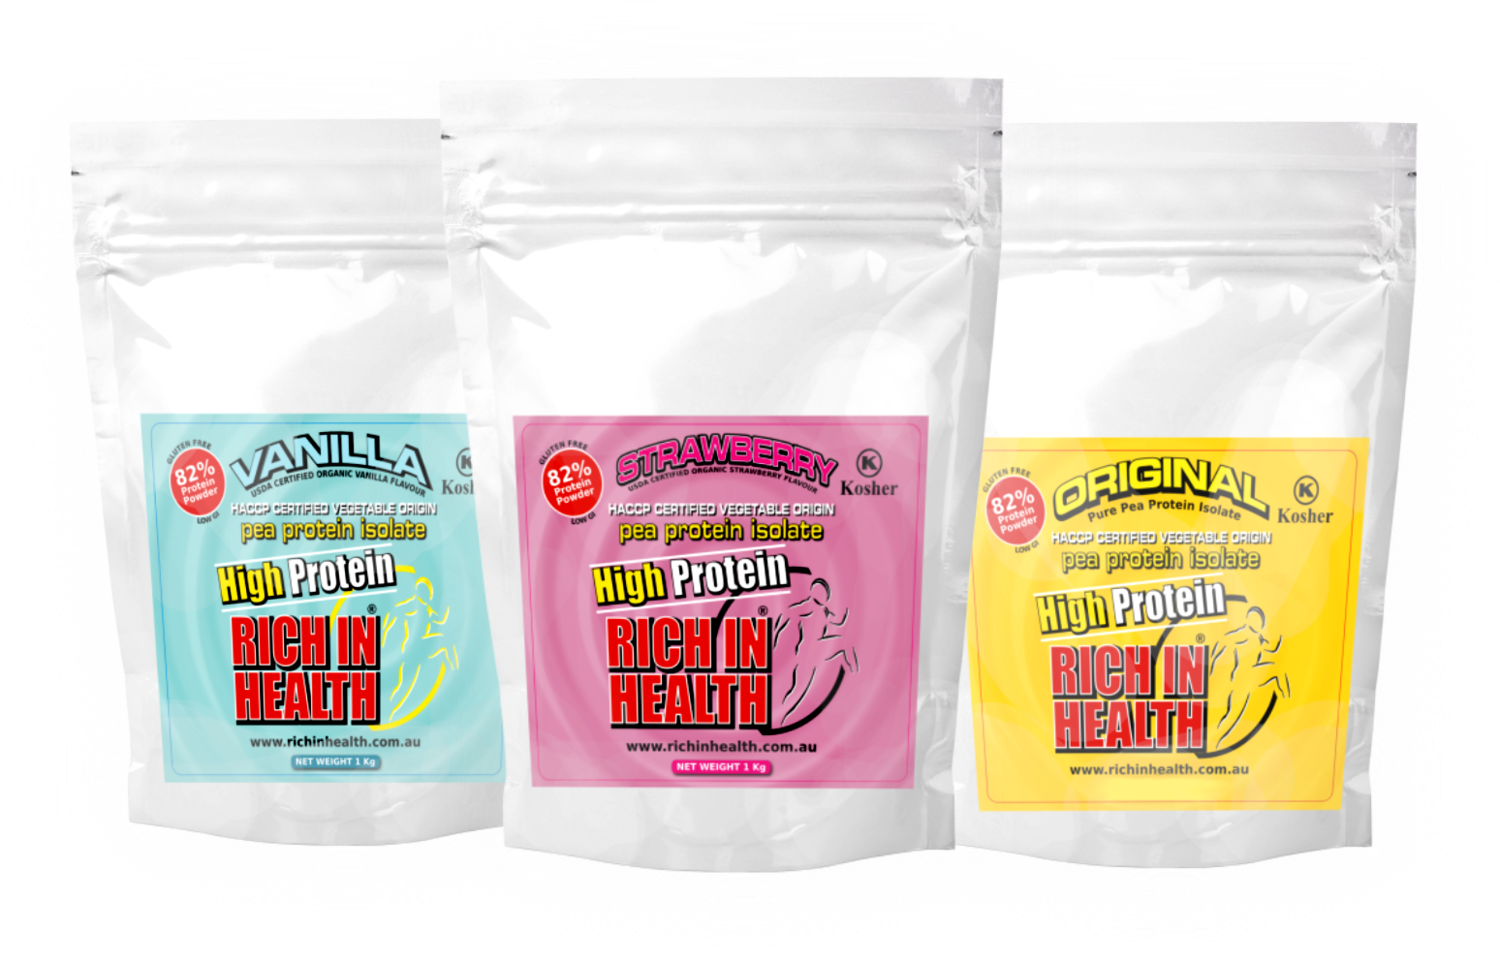 Post Ready Buy 2 get 1 Free 3kg Pea Protein Isolate Powder Mixed Flavours